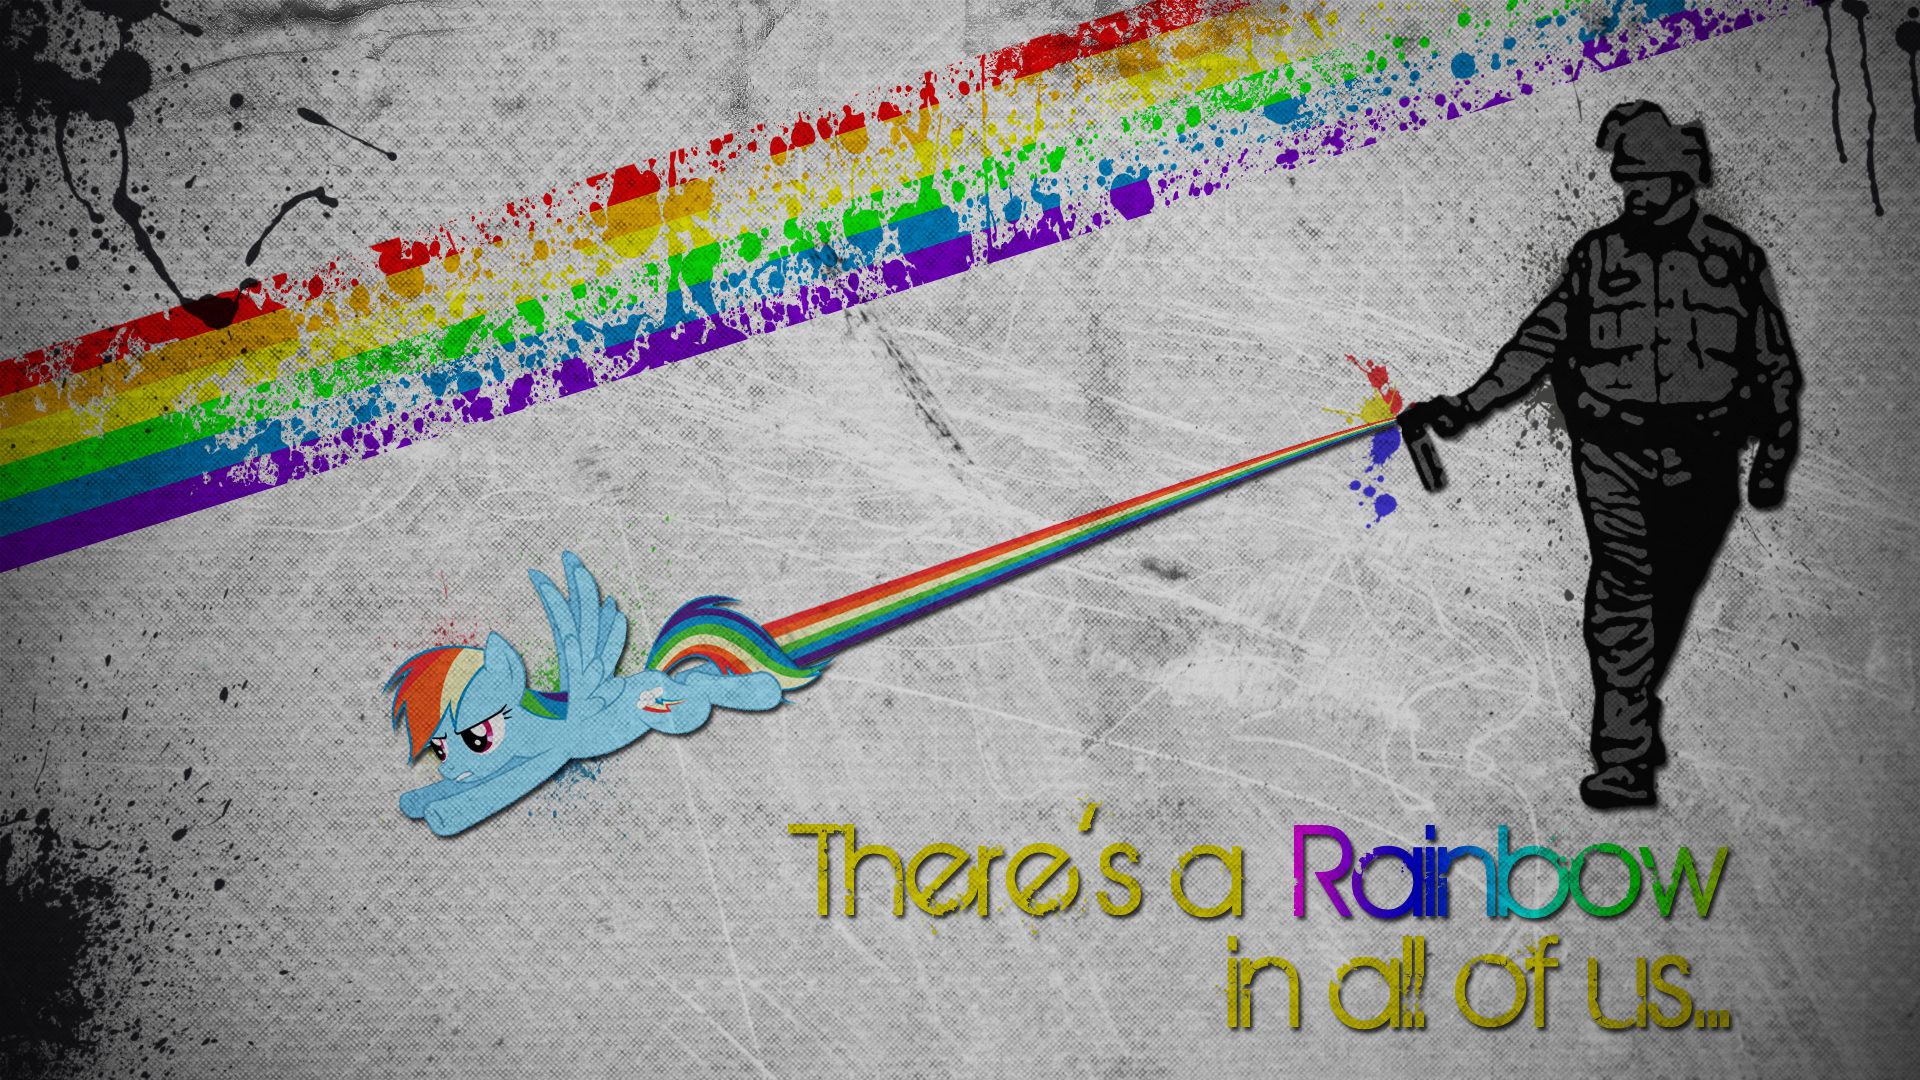 There's a Rainbow in all of us (R. Dash Wallpaper) by TheSlickOctopus